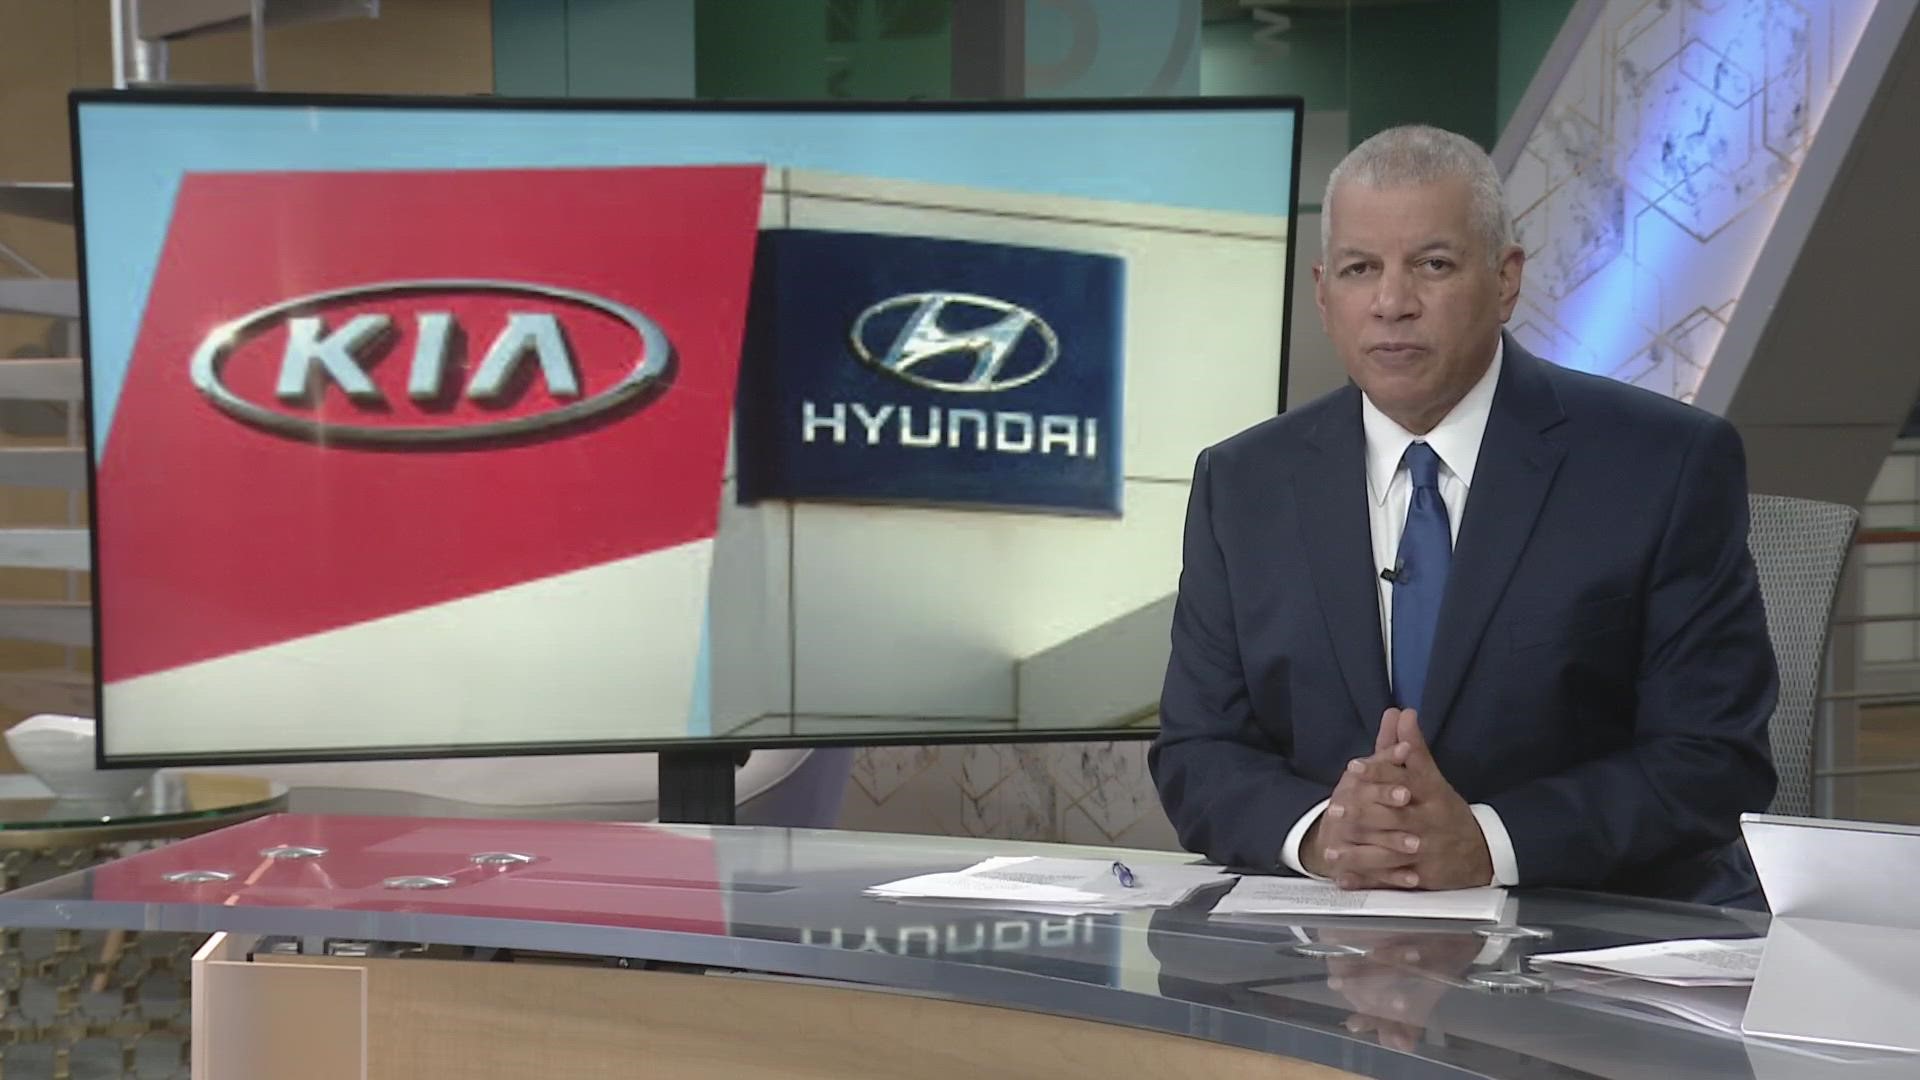 On Monday, Cleveland City Council introduced an emergency resolution calling on Mayor Justin Bibb to sue Kia and Hyundai following a rash of thefts.